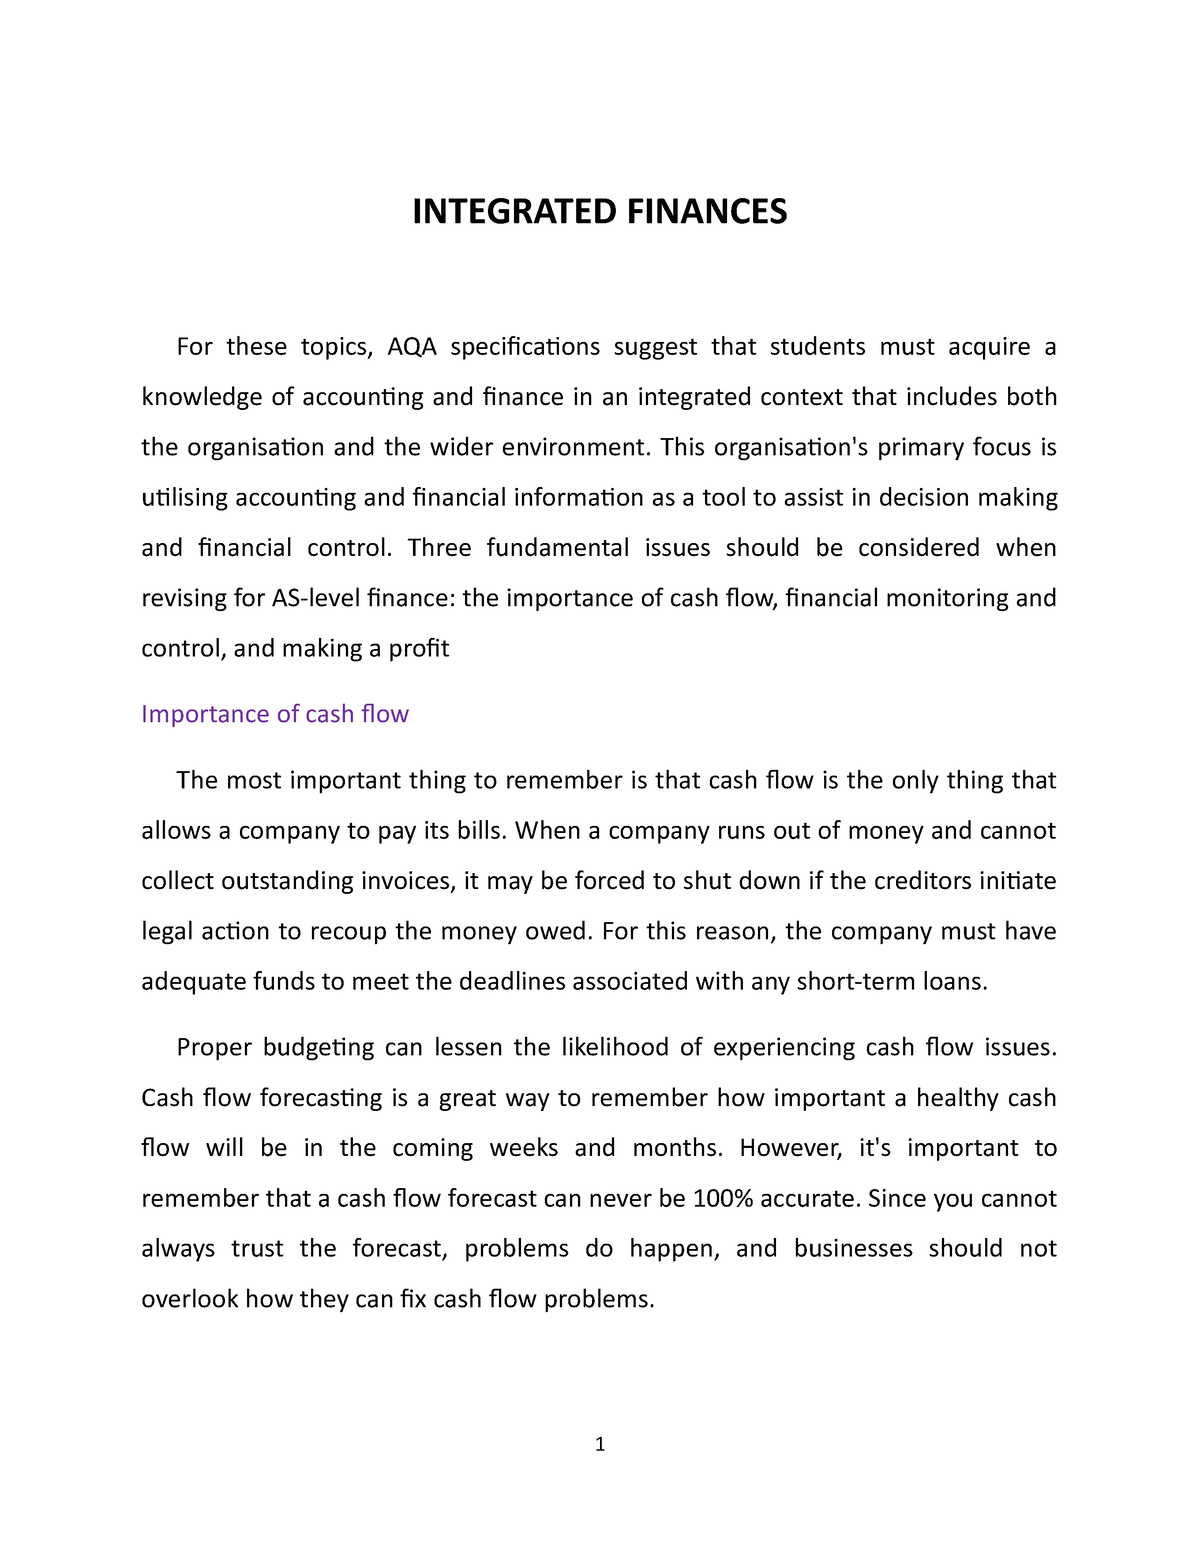 financial integration phd thesis